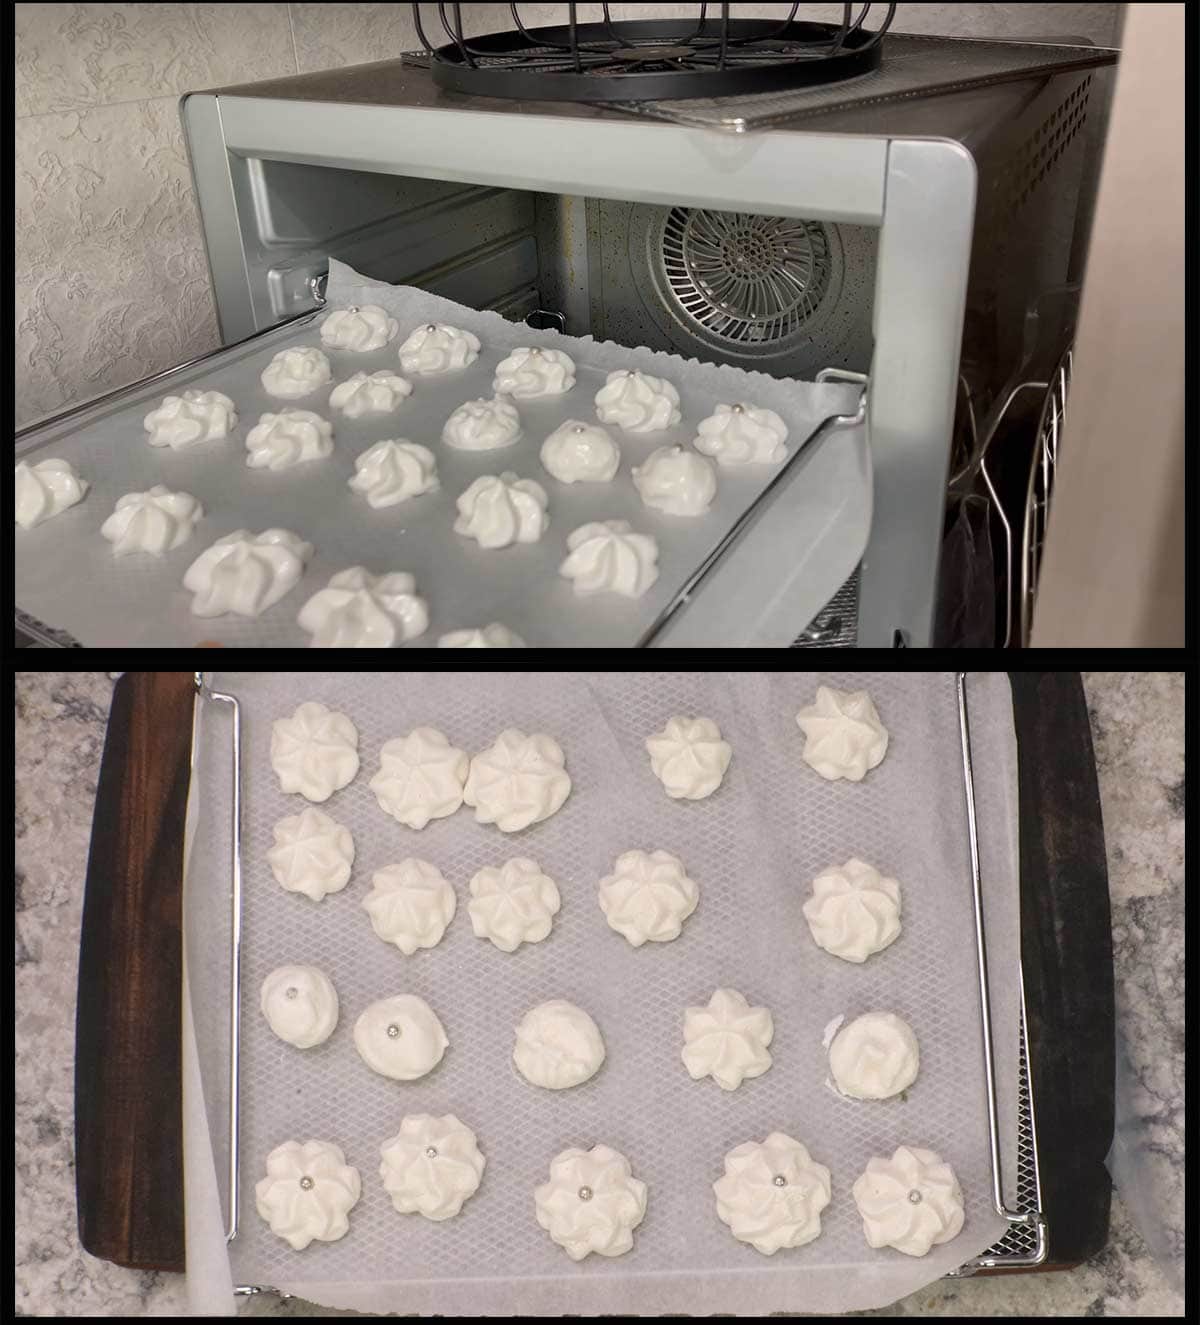 Peppermint meringue cookies made in the XL oven using dehydrate.